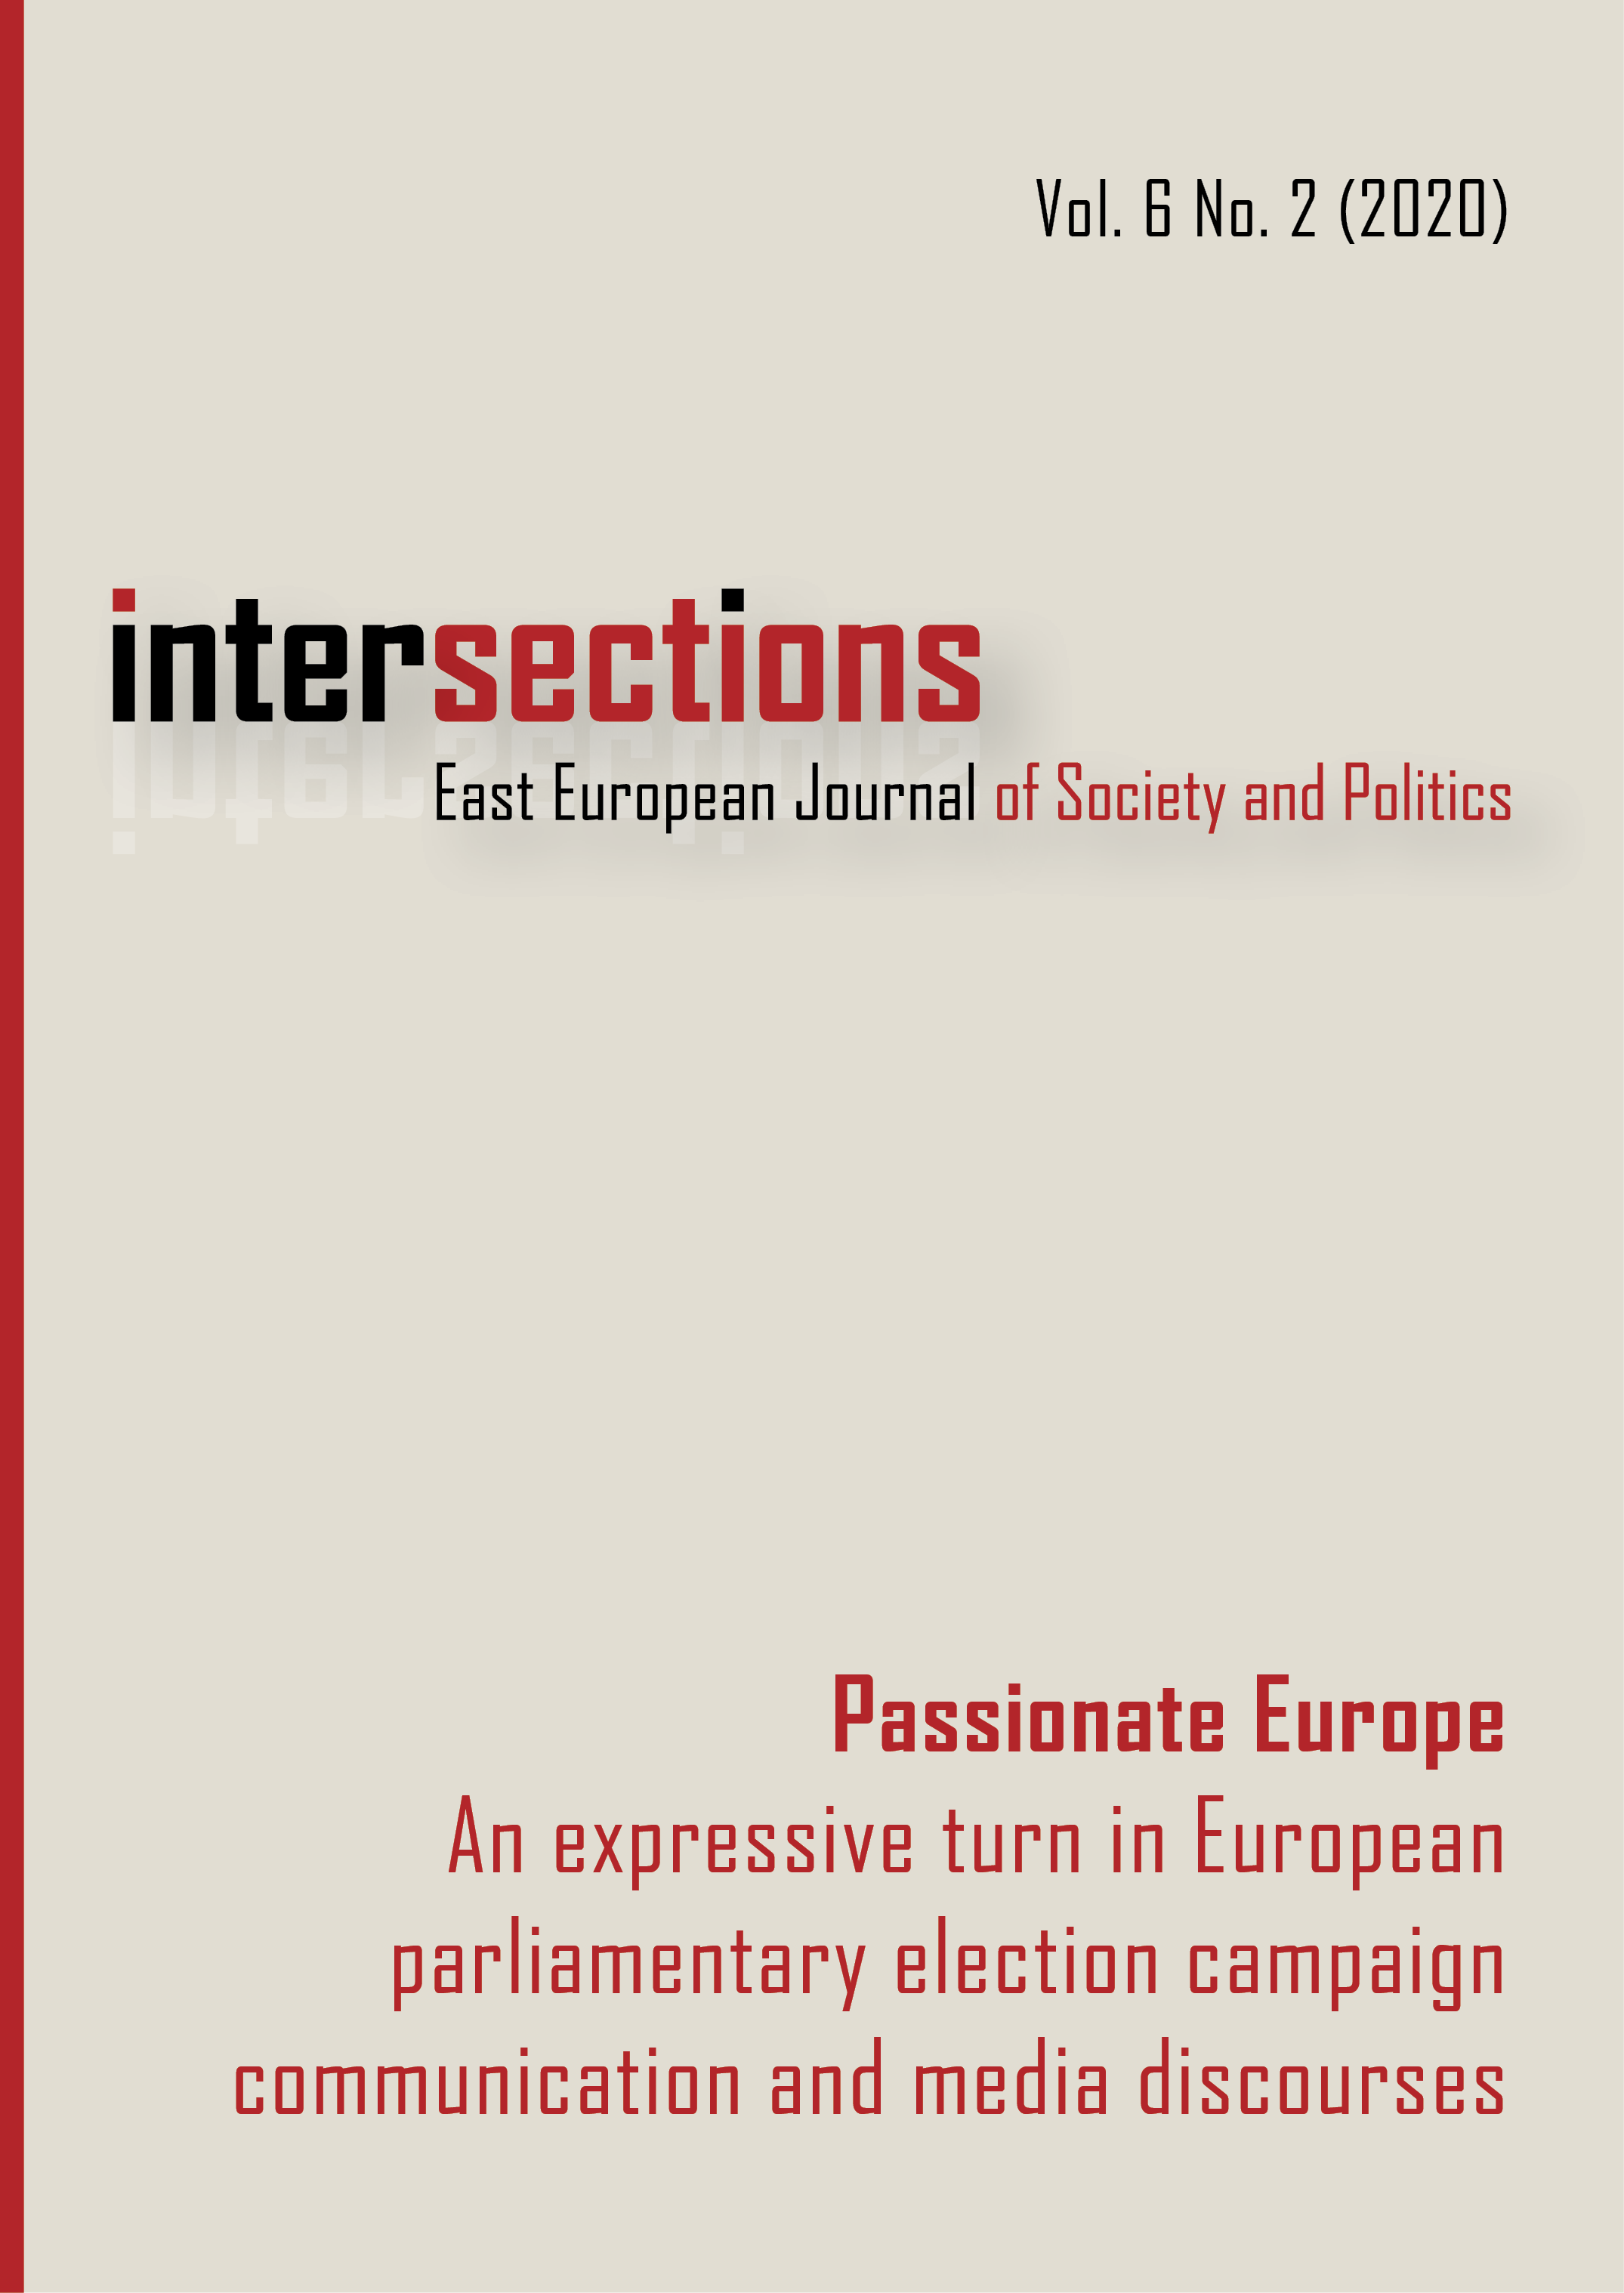 					View Vol. 6 No. 2 (2020): Passionate Europe. An expressive turn in European parliamentary election campaign communication and media discourses
				